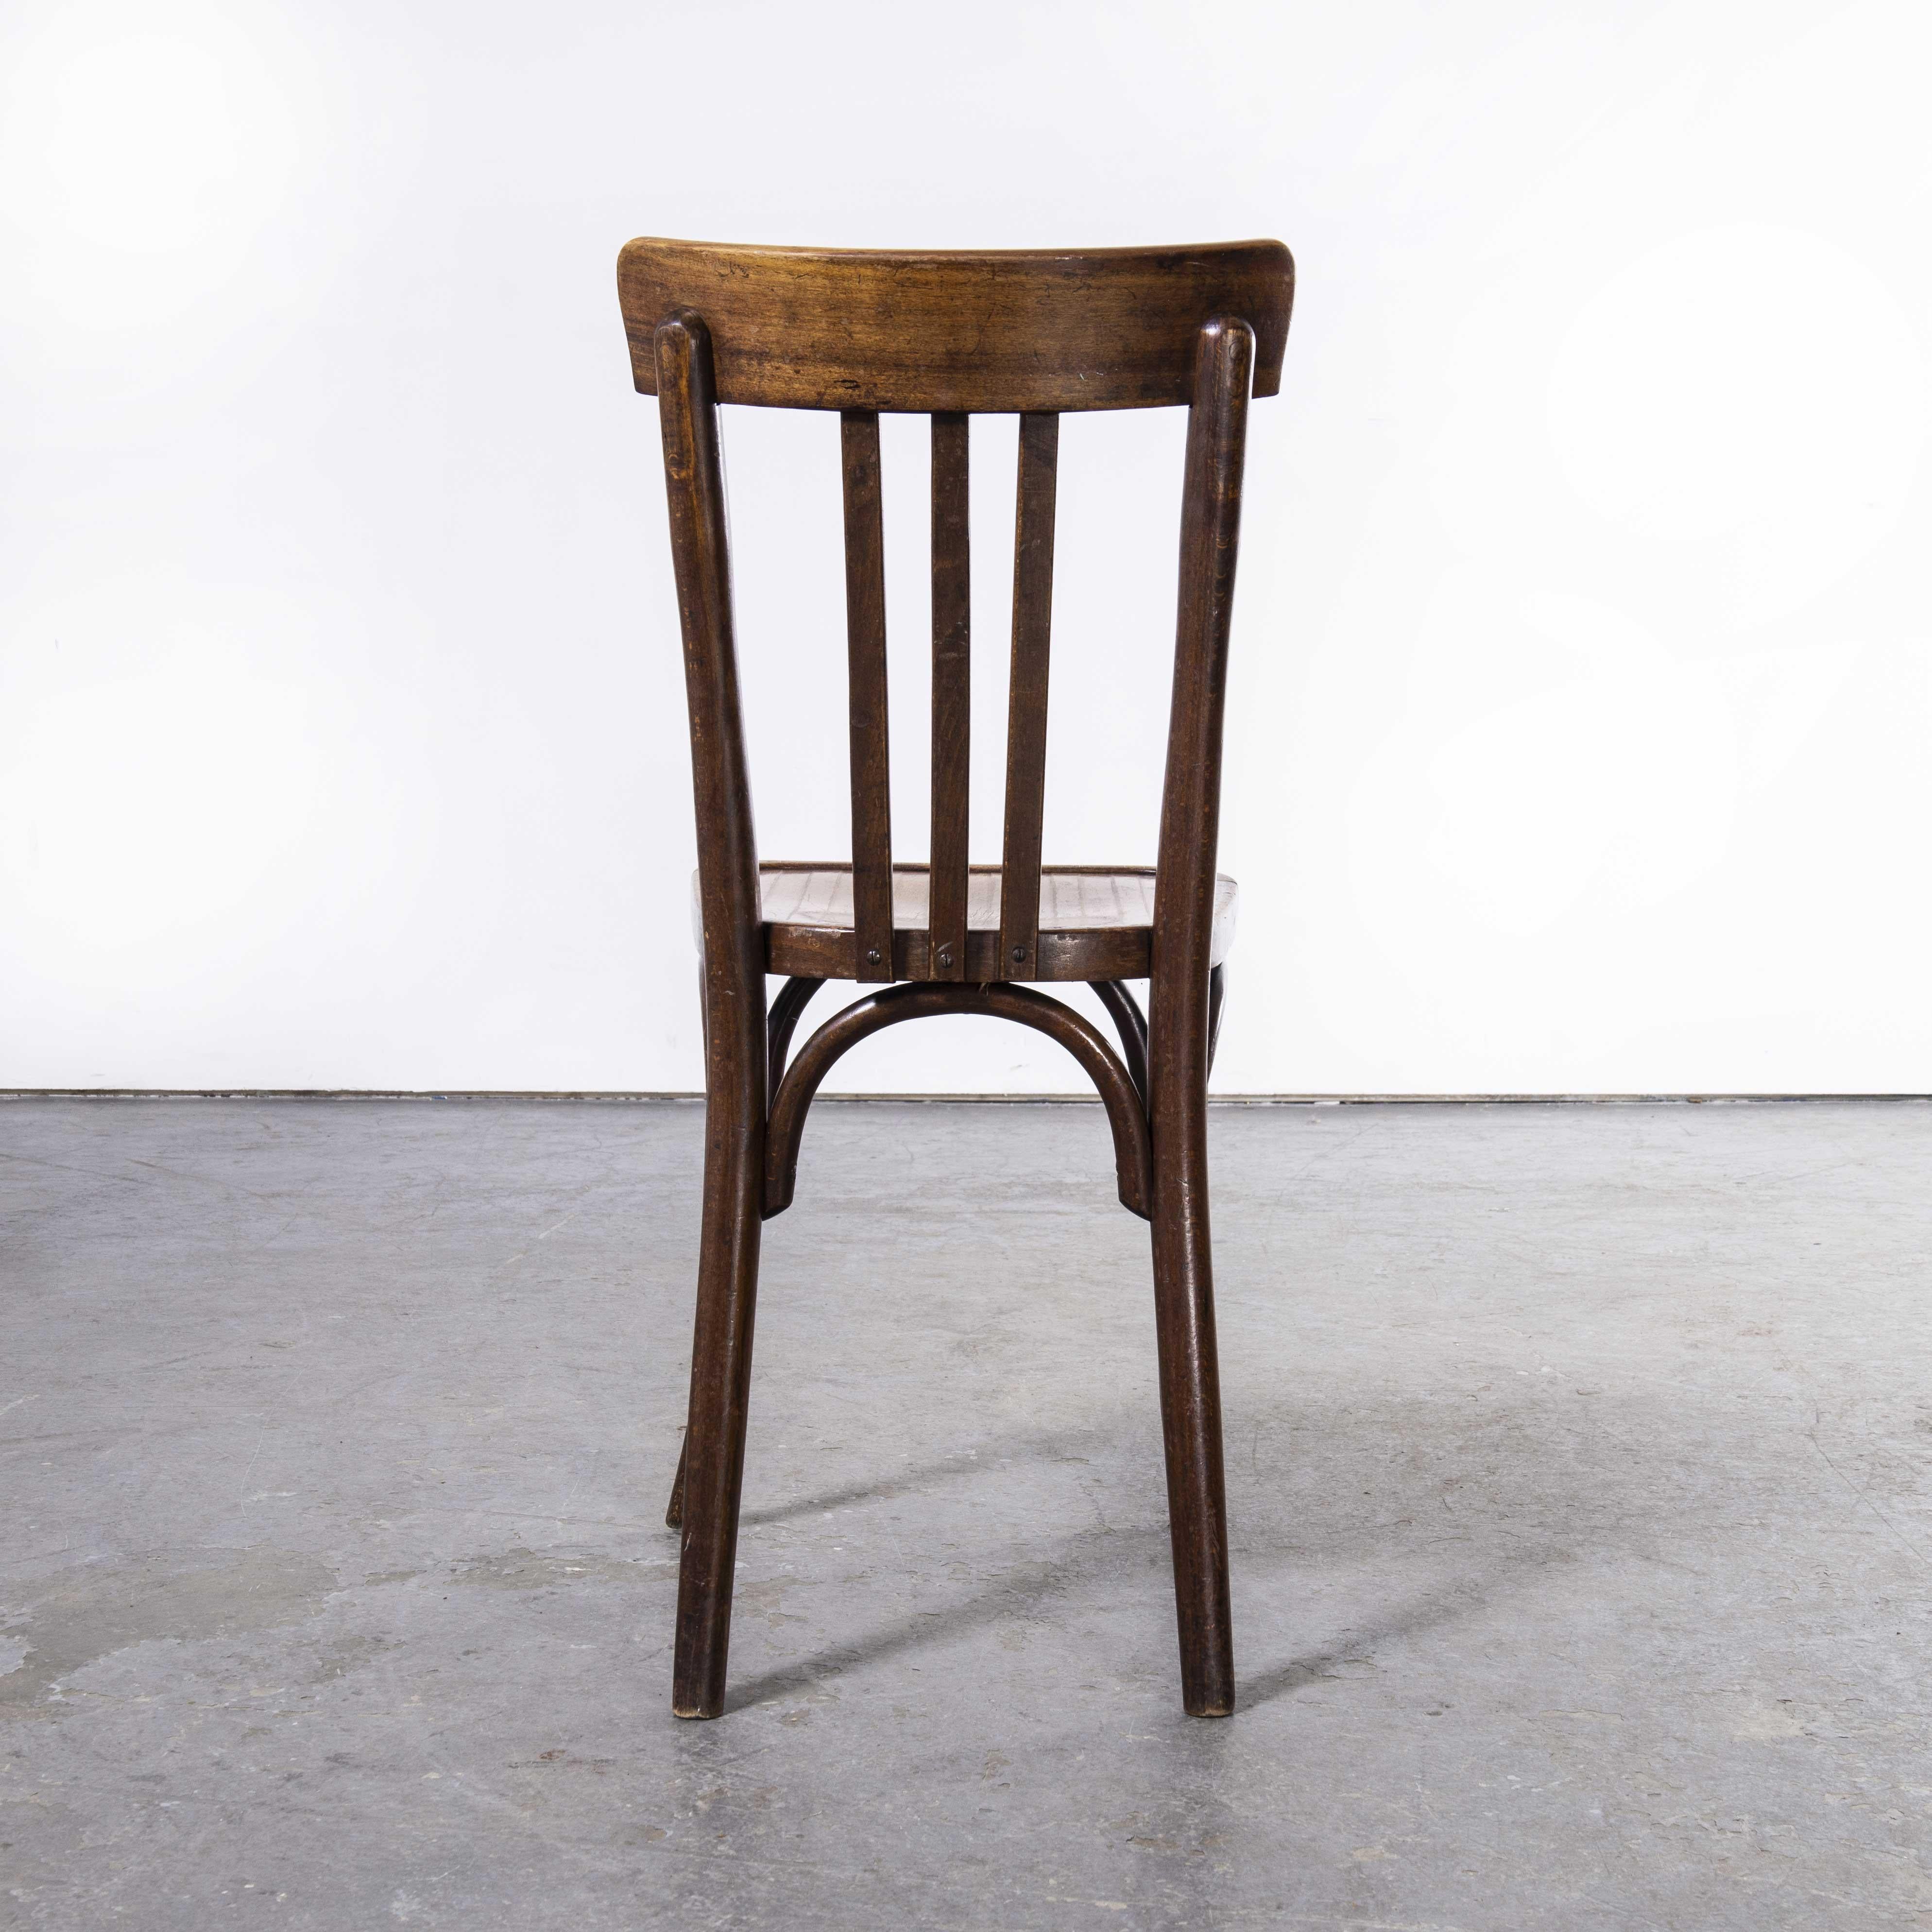 1920’s Baumann bentwood three slat dining chairs – set of five

1920’s Baumann bentwood three slat dining chairs – set of five. Classic early beech bistro chair made in France by the maker Joamin Baumann. Baumann is a slightly off the radar French